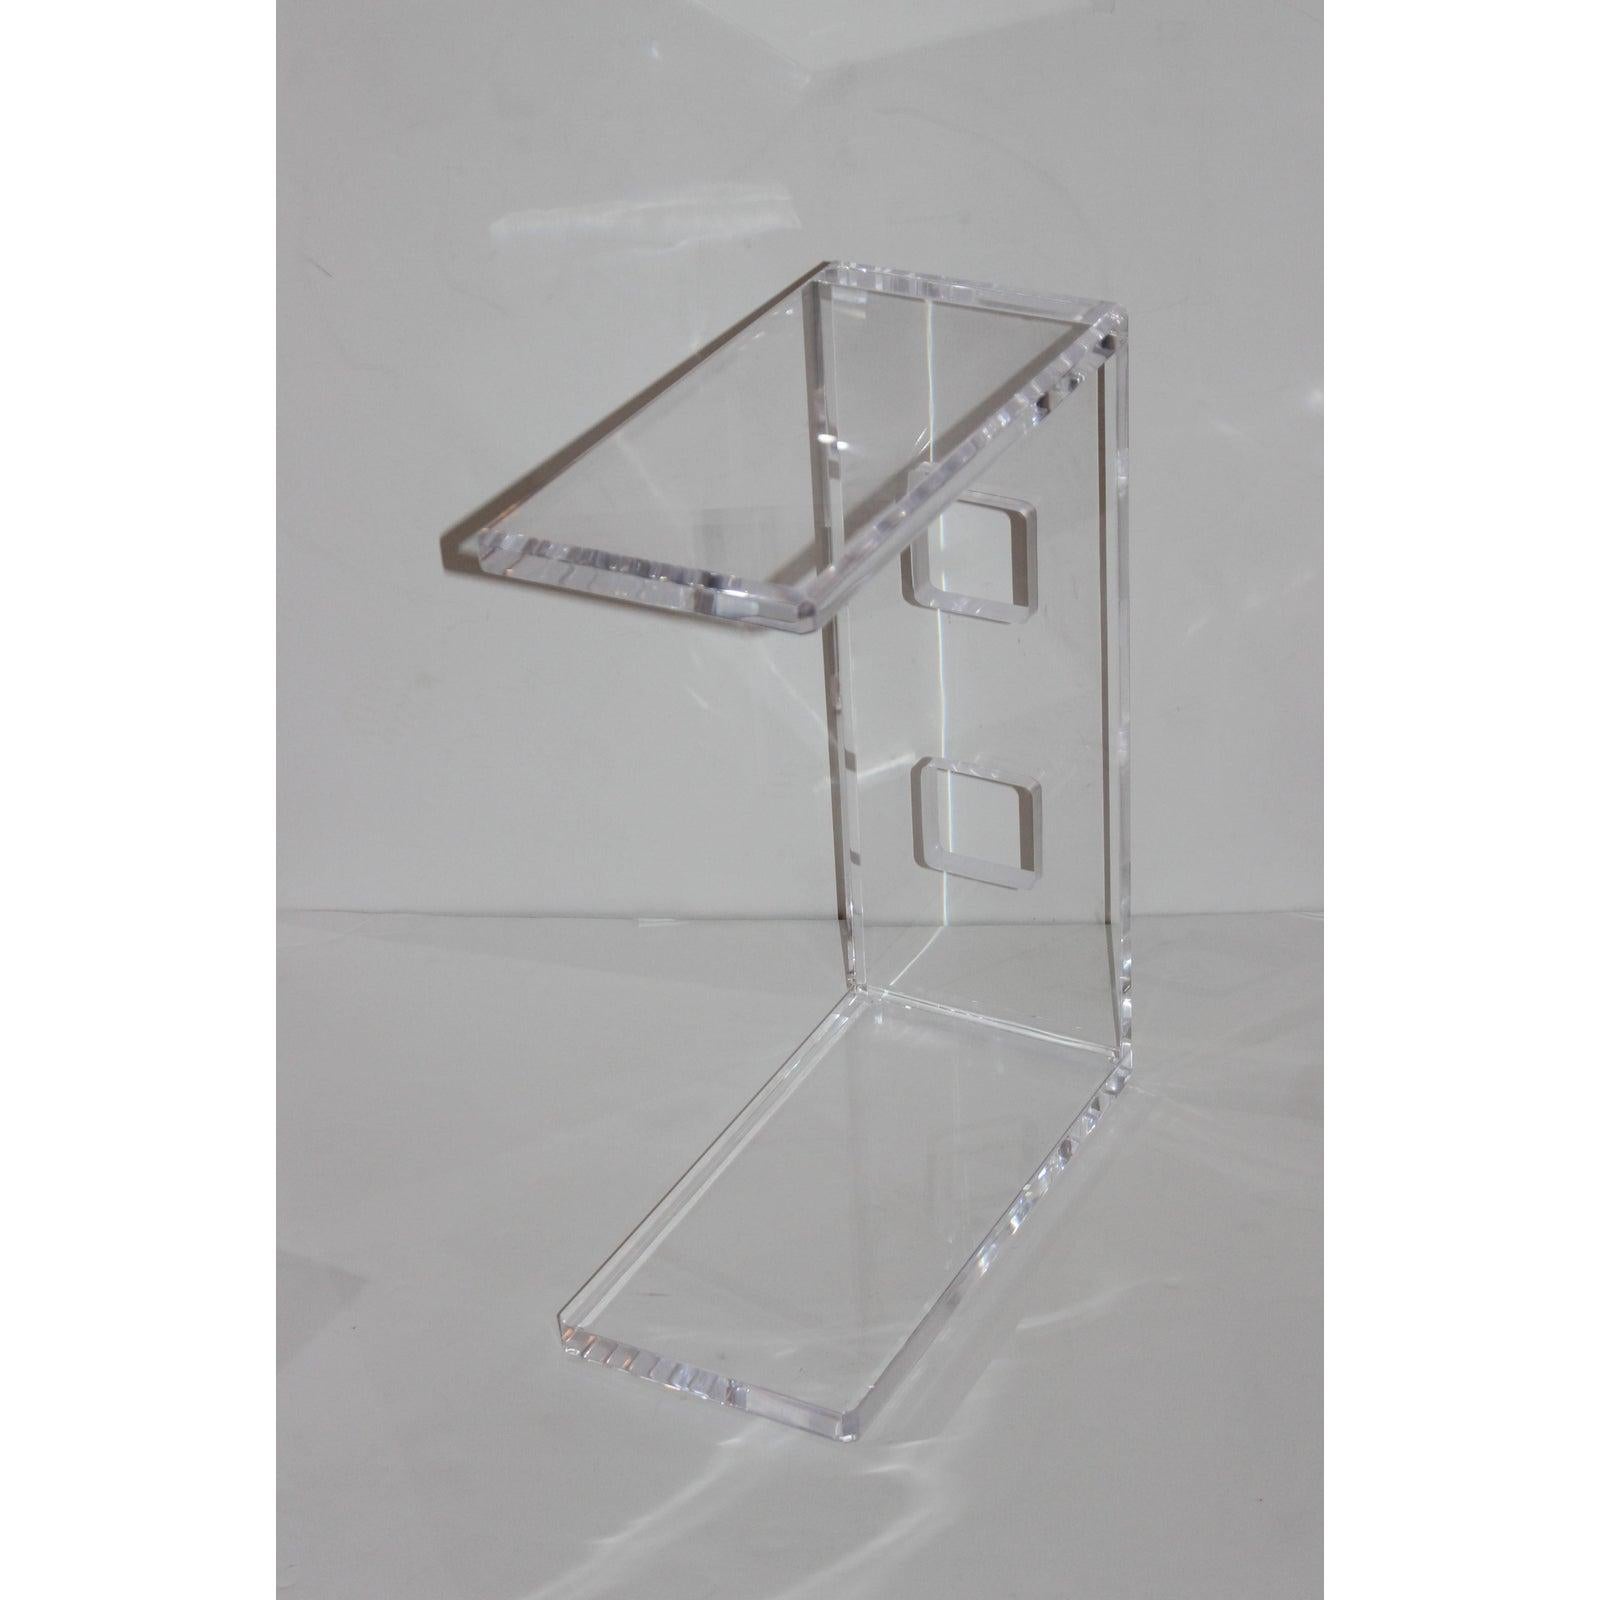 This stylish custom made lucite drinks table by Iconic Snob Galeries is the perfect size next to the sofa a club chair and with its open-end design the piece can be pulled up to the sofa as needed (see last image).

This is fashioned from 1 inch